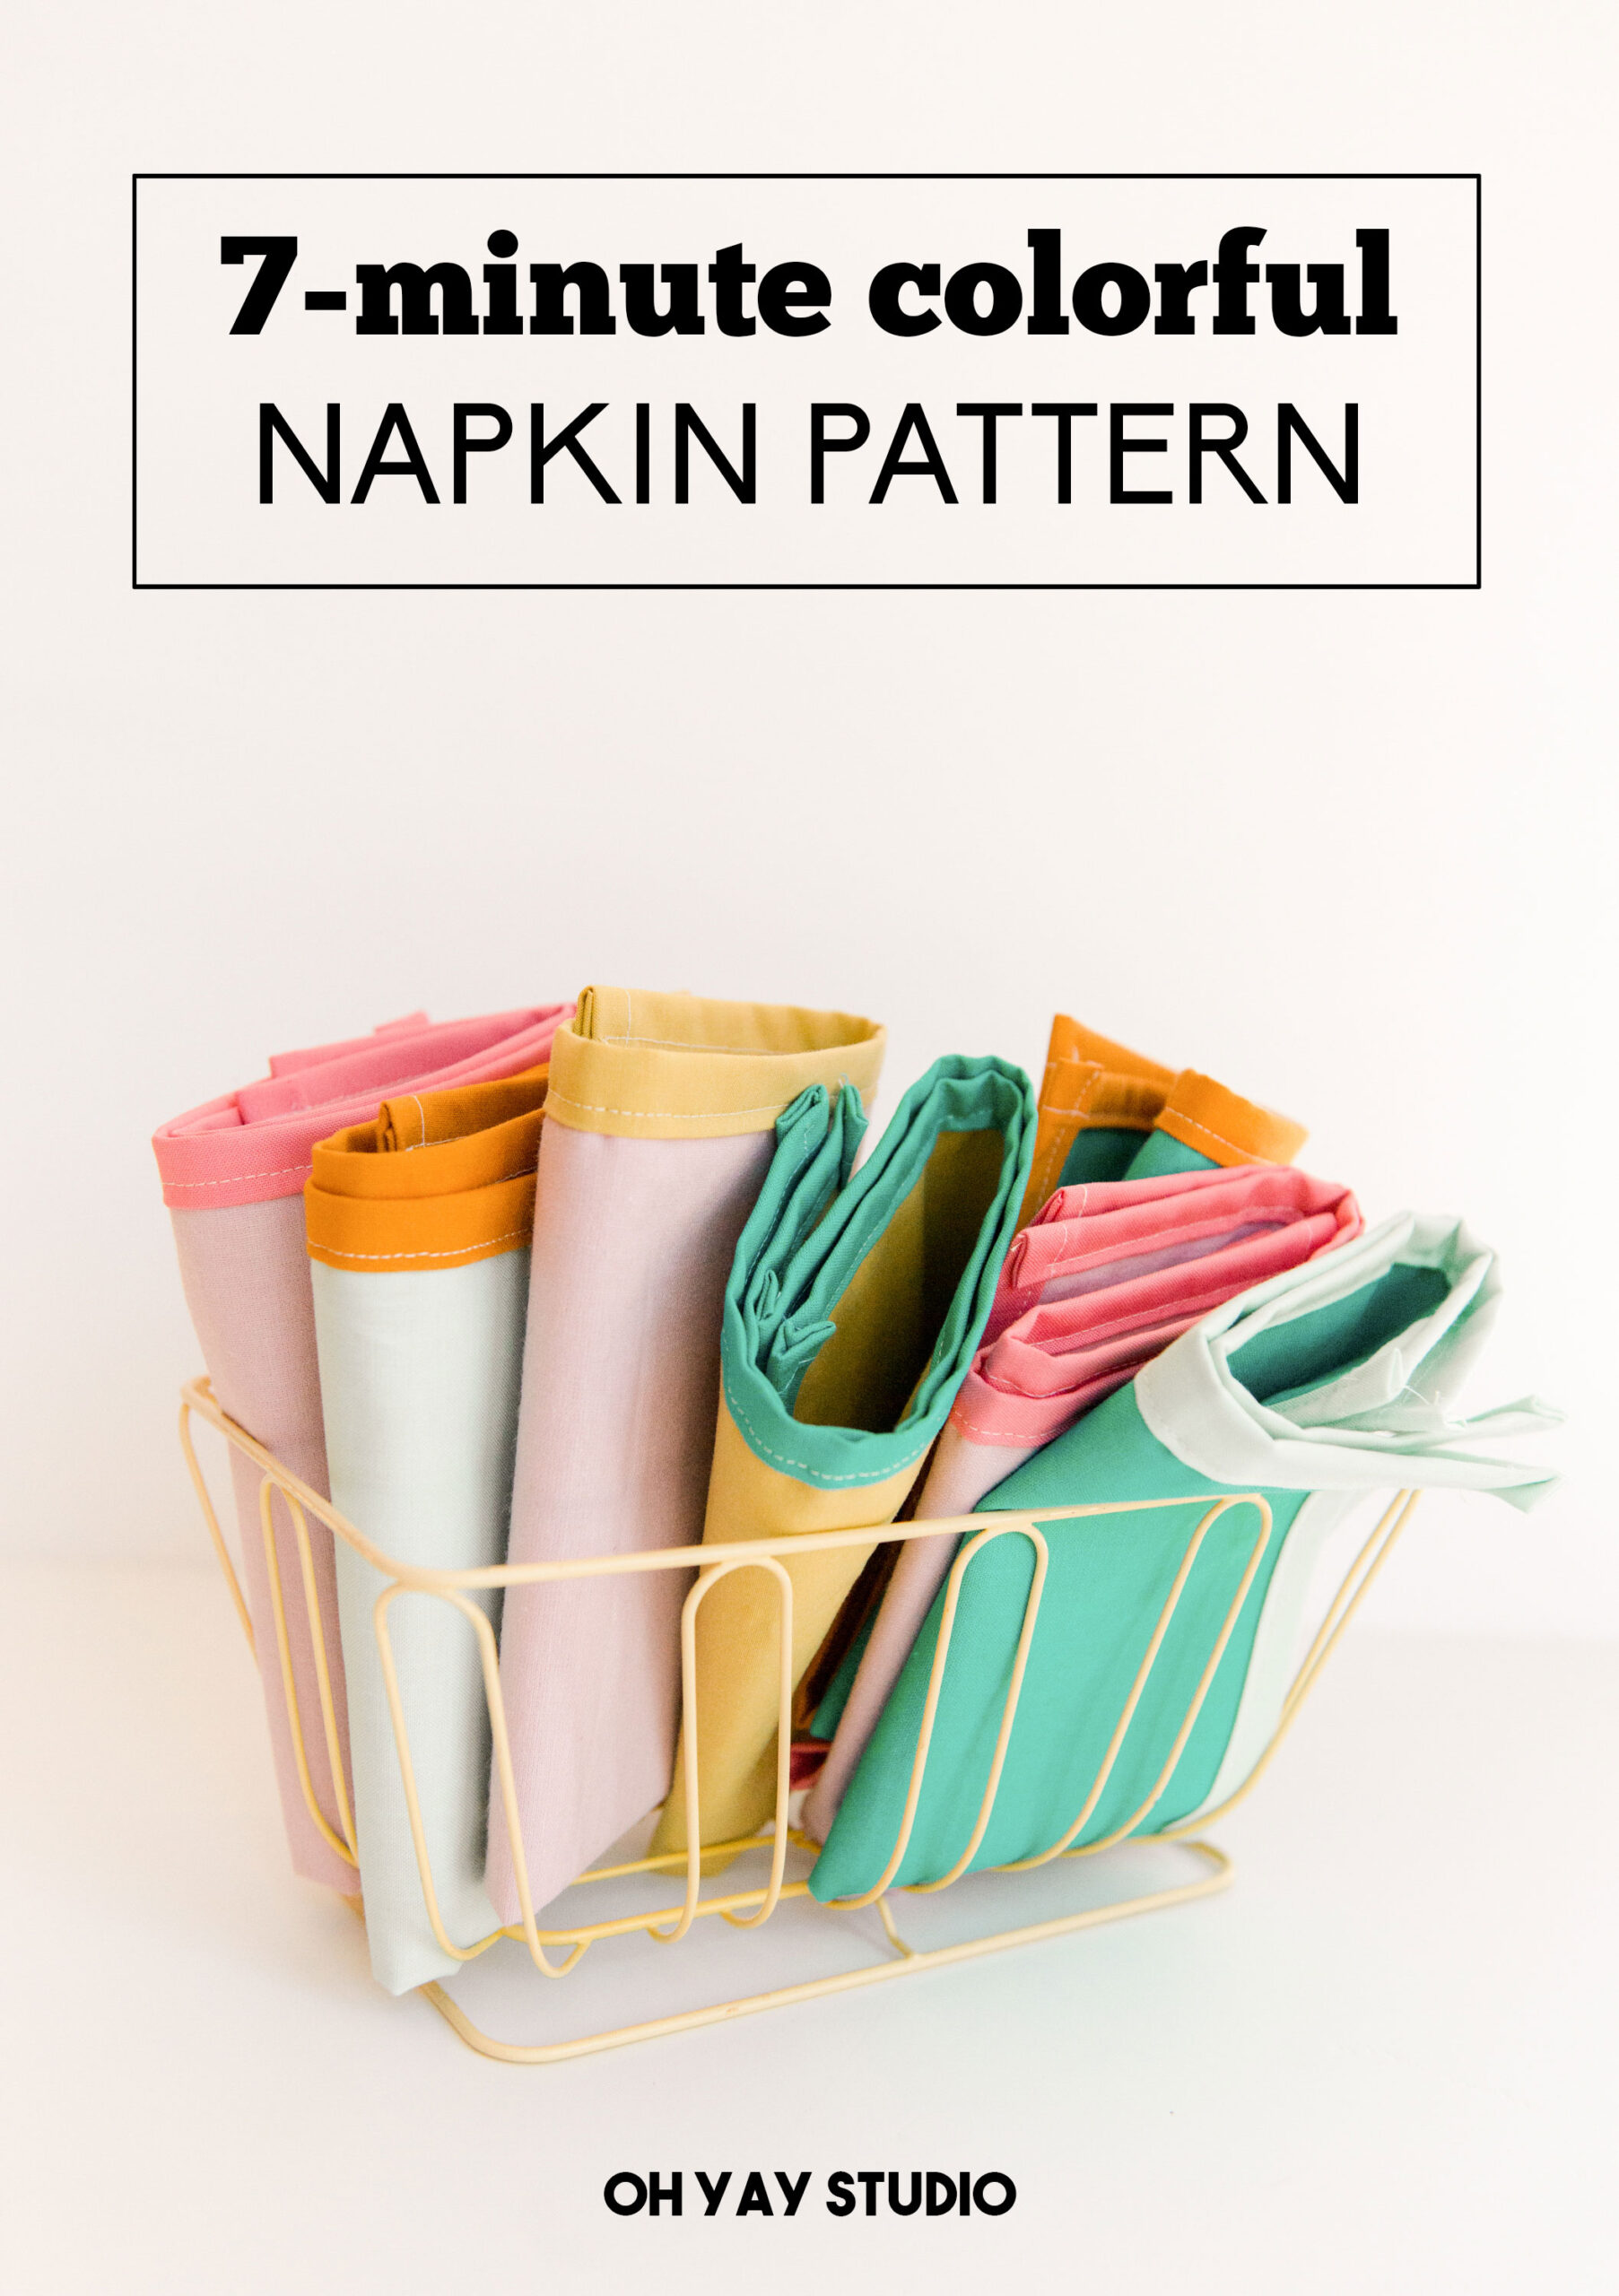 Colorful napkin sewing pattern, easy napkin sewing pattern, basic sewing pattern for a napkin, simple napkin sewing pattern, colorful cloth napkin pattern, colorful fabric napkin pattern